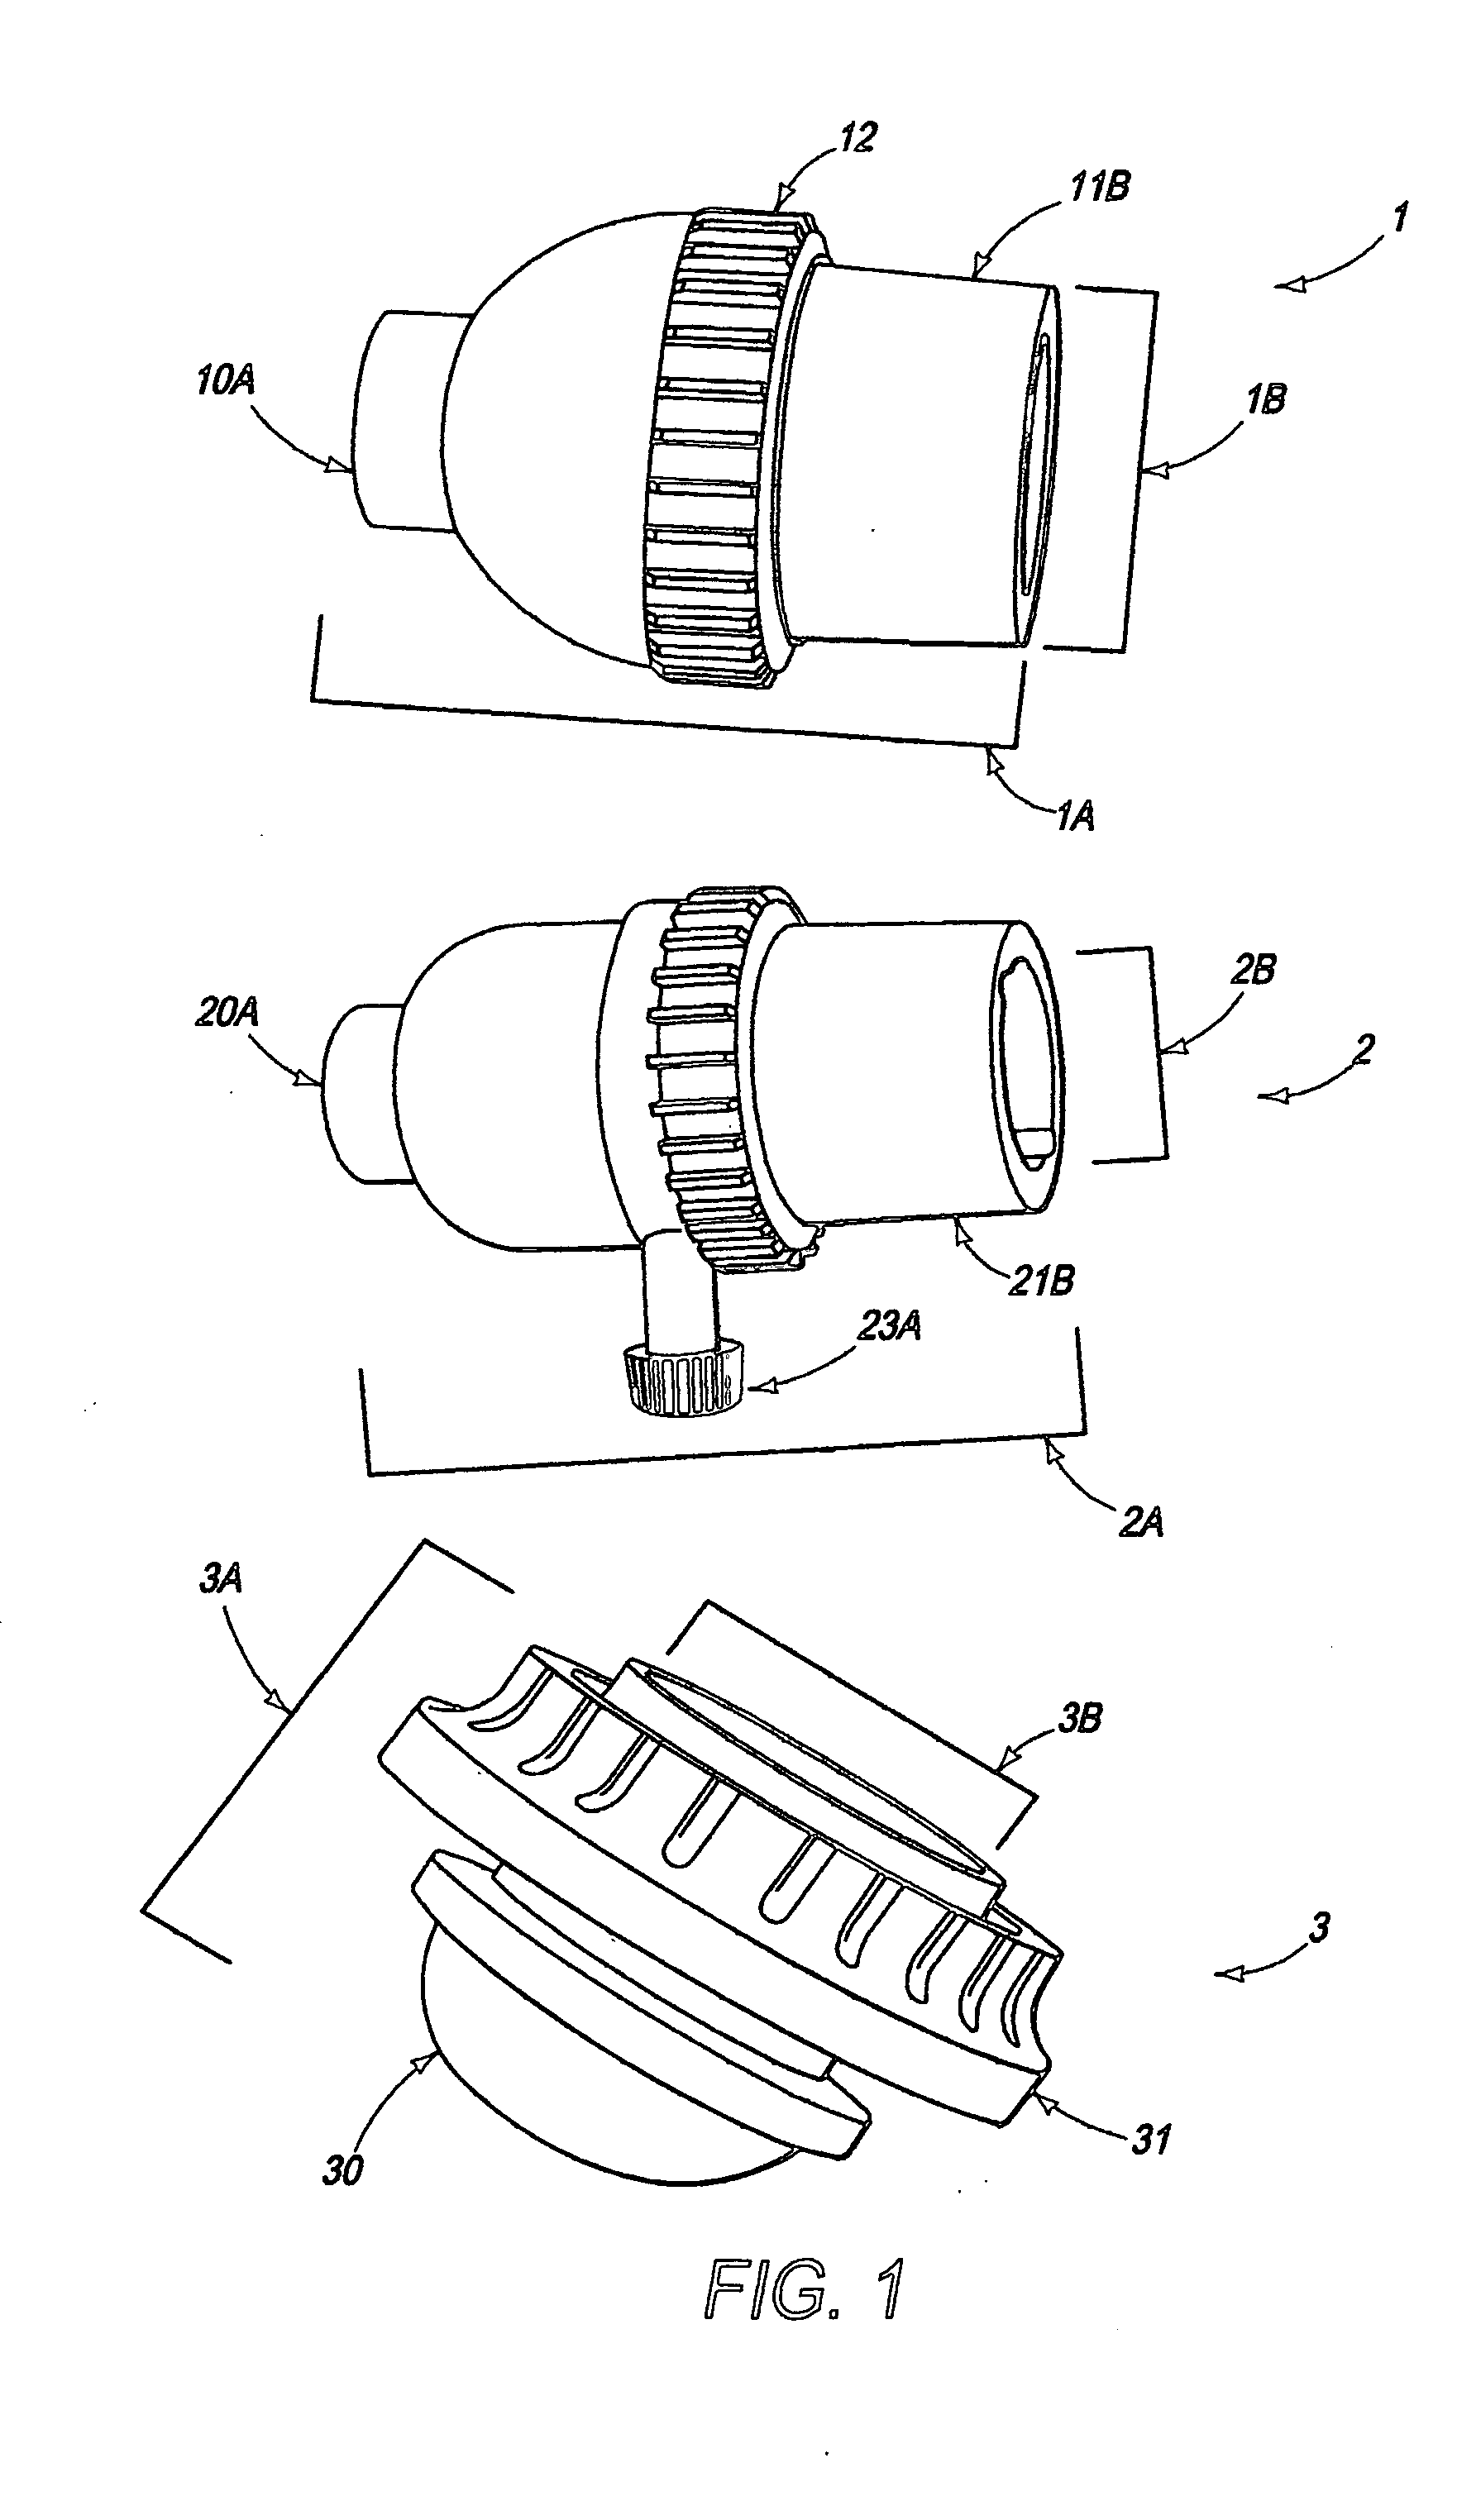 Light bulb theft-reduction apparatus and method of use